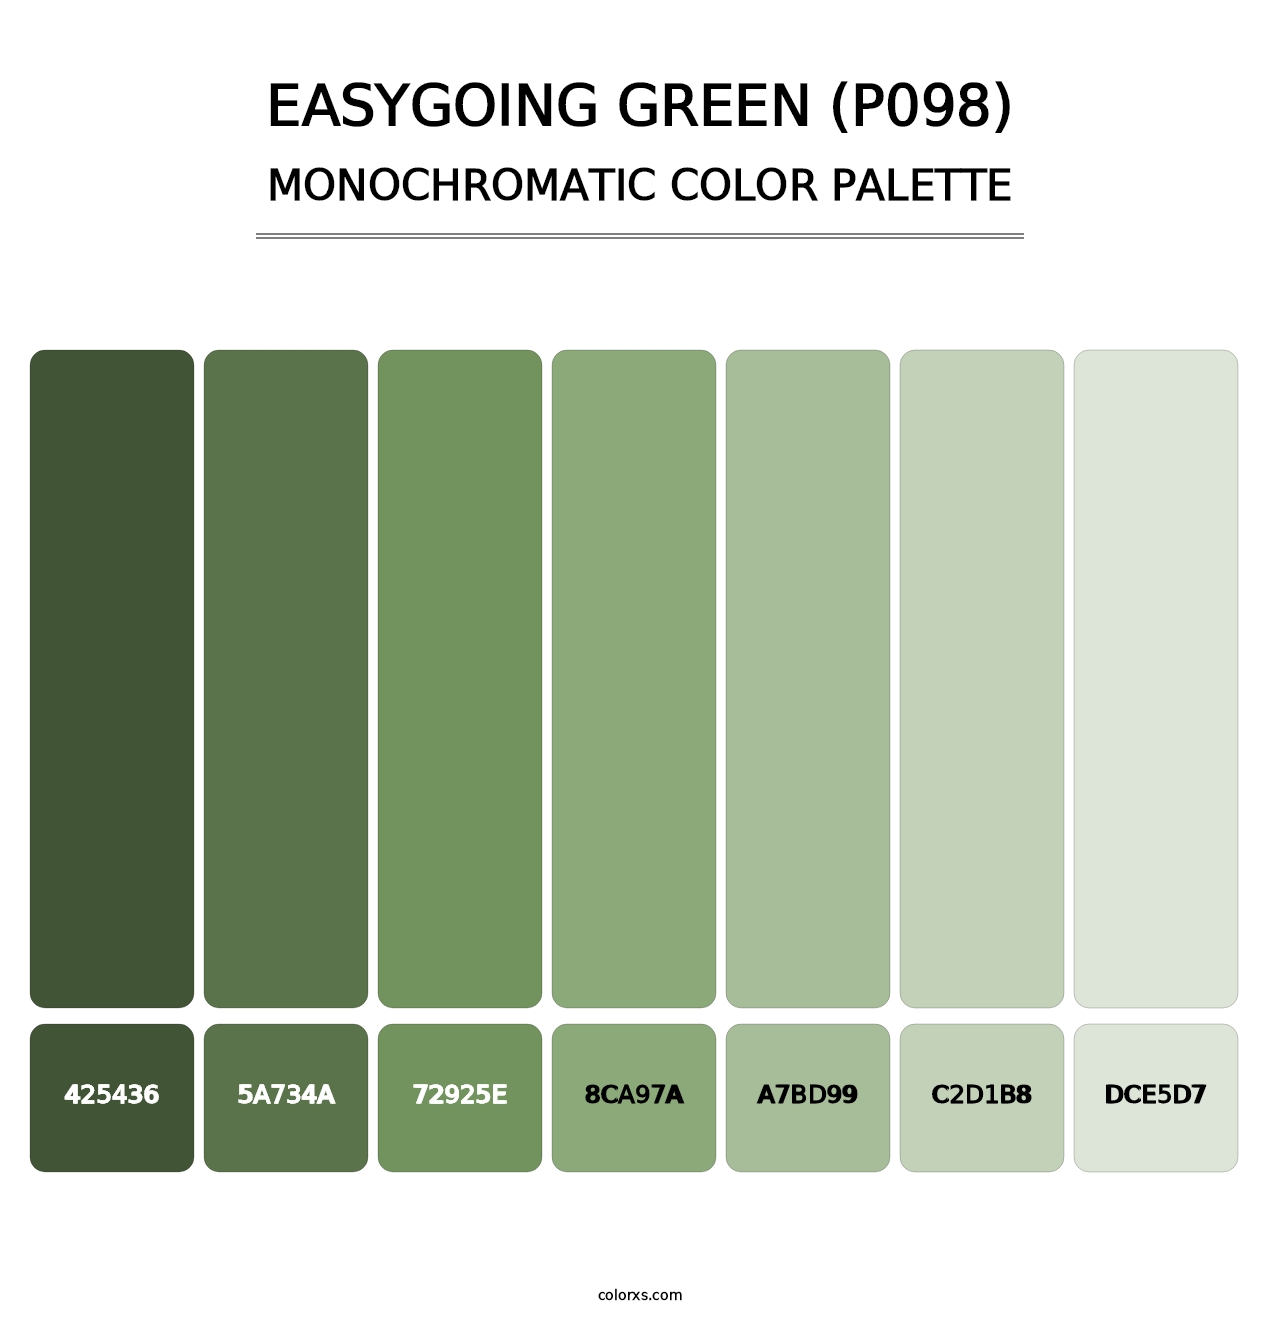 Easygoing Green (P098) - Monochromatic Color Palette